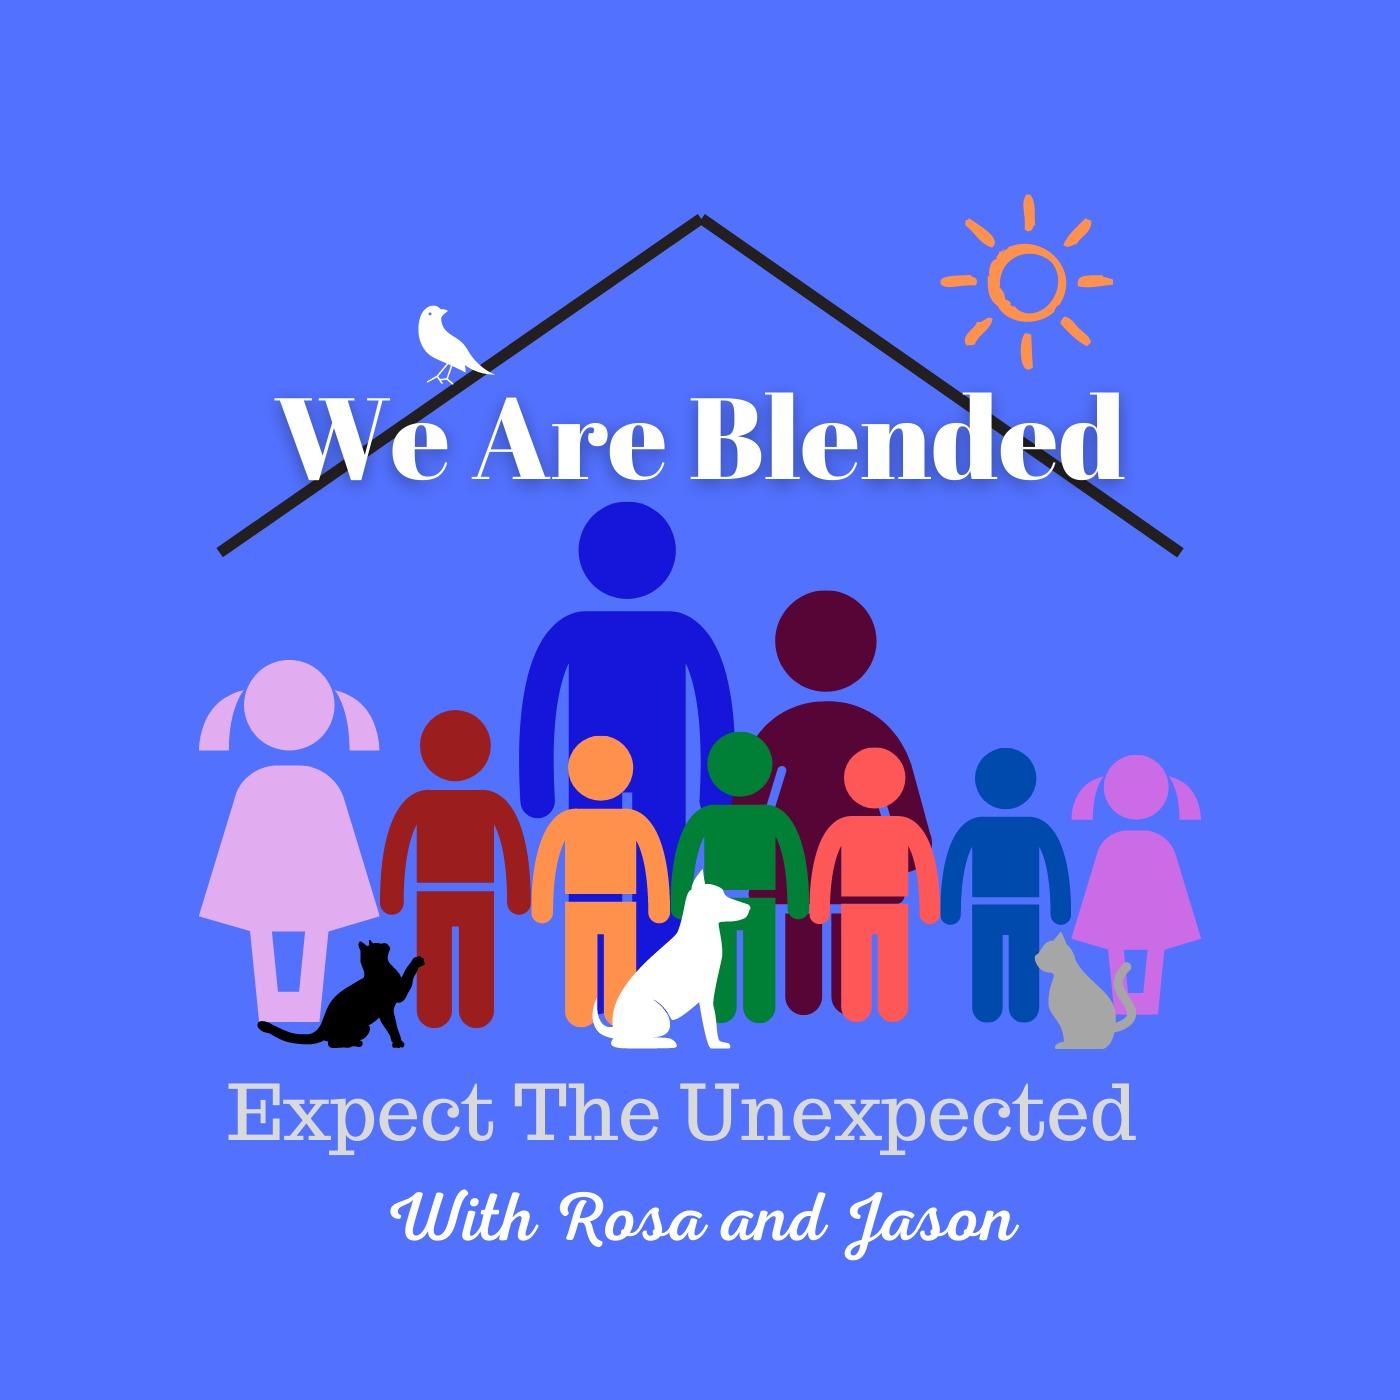 We Are Blended